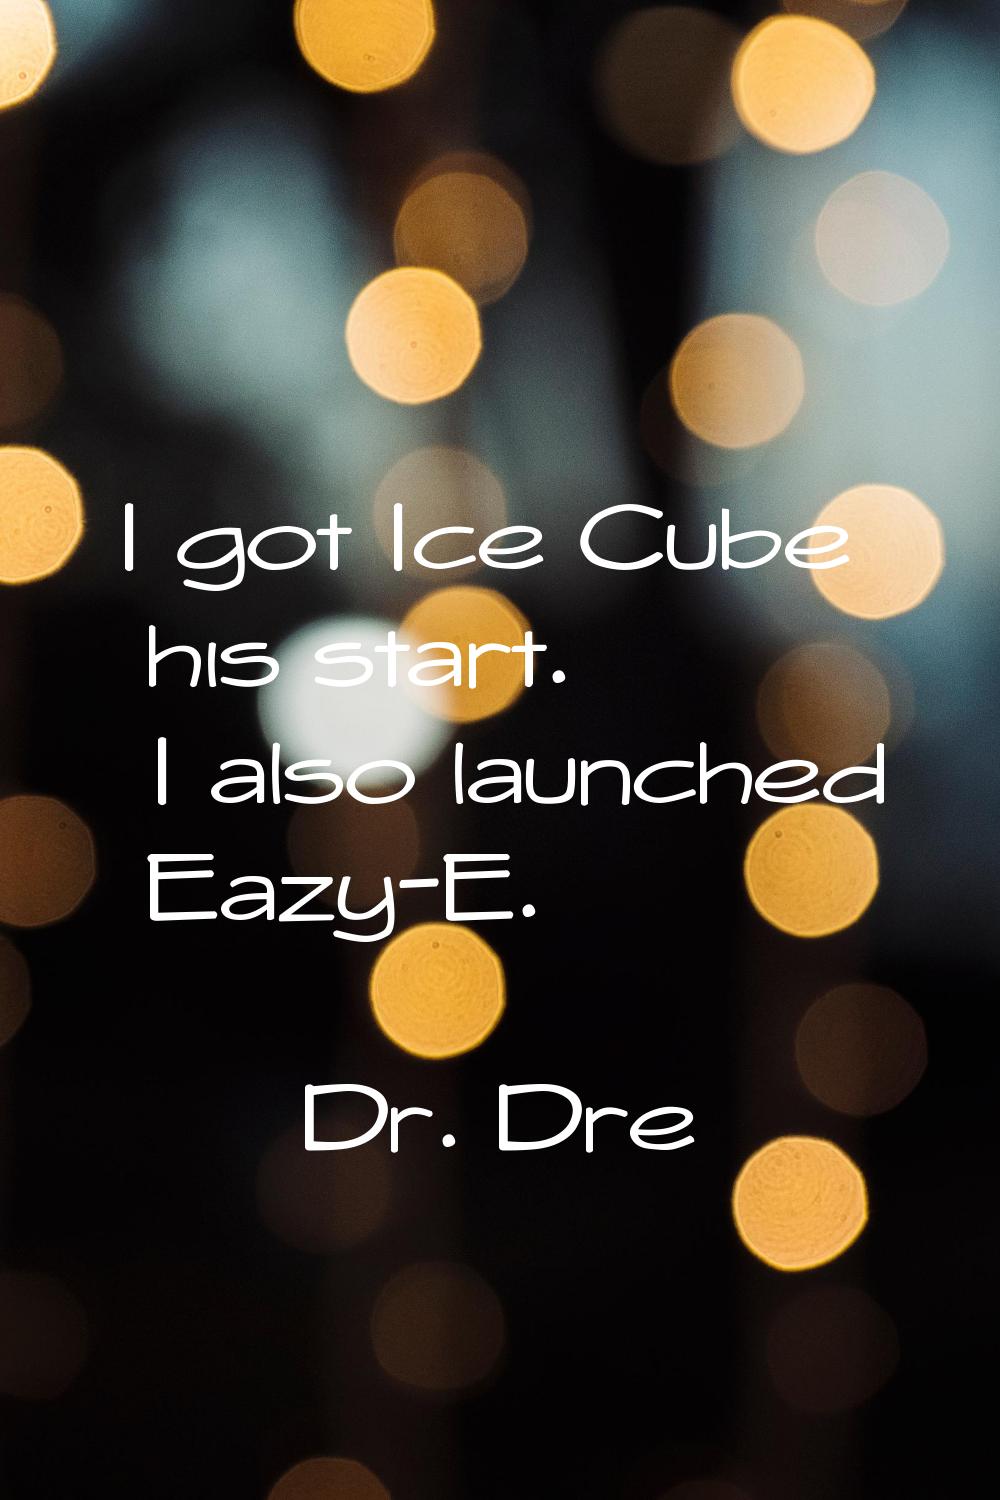 I got Ice Cube his start. I also launched Eazy-E.